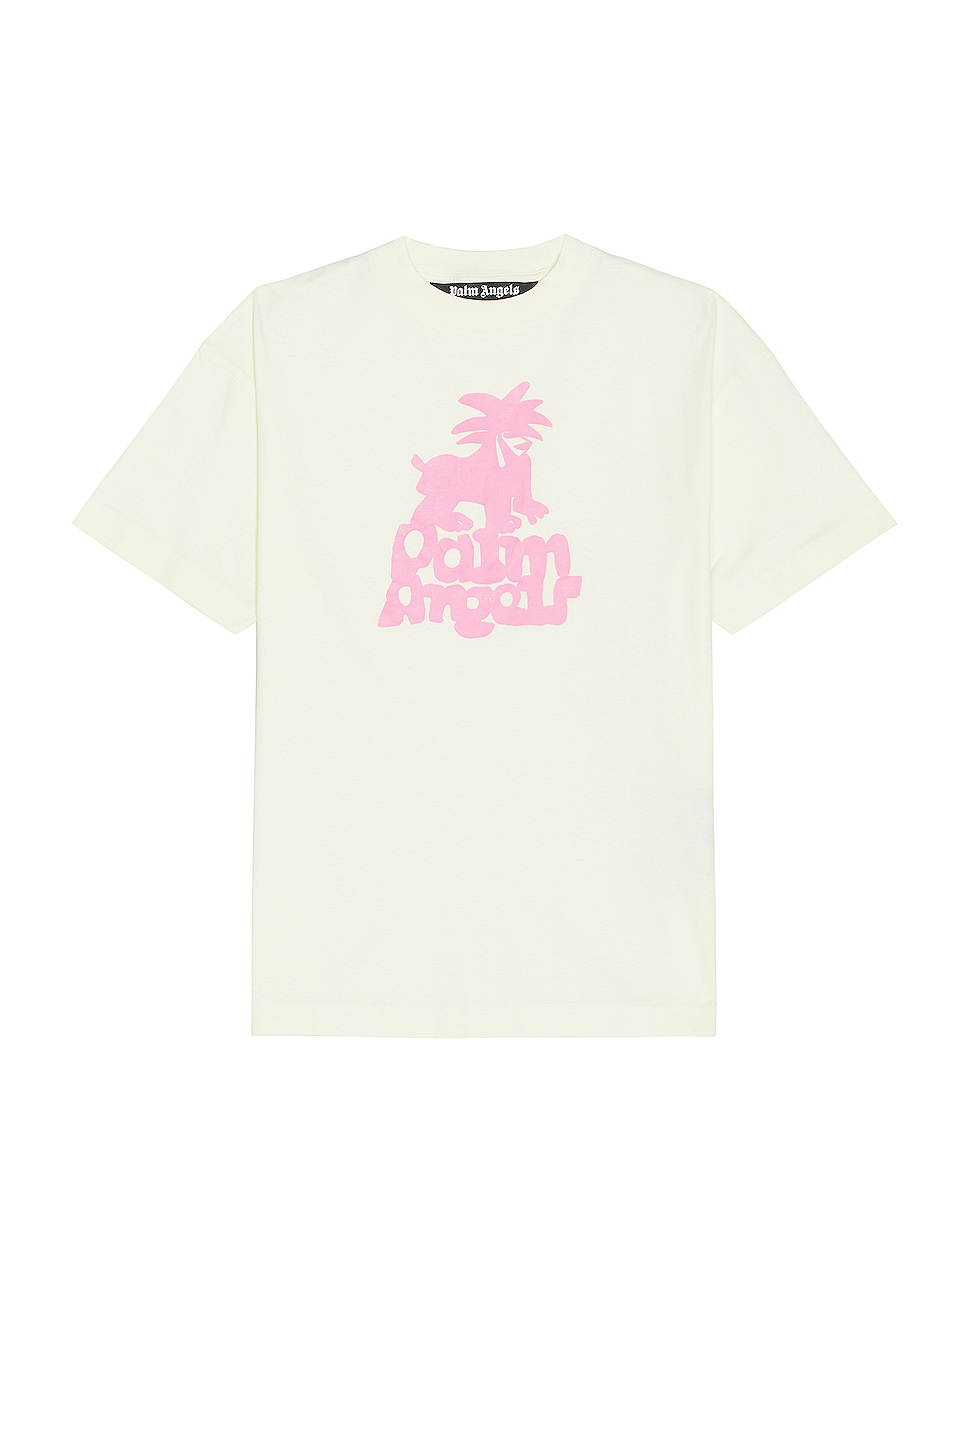 Image 1 of Palm Angels Leon Classic Tee in Pale Green & Fuchsia